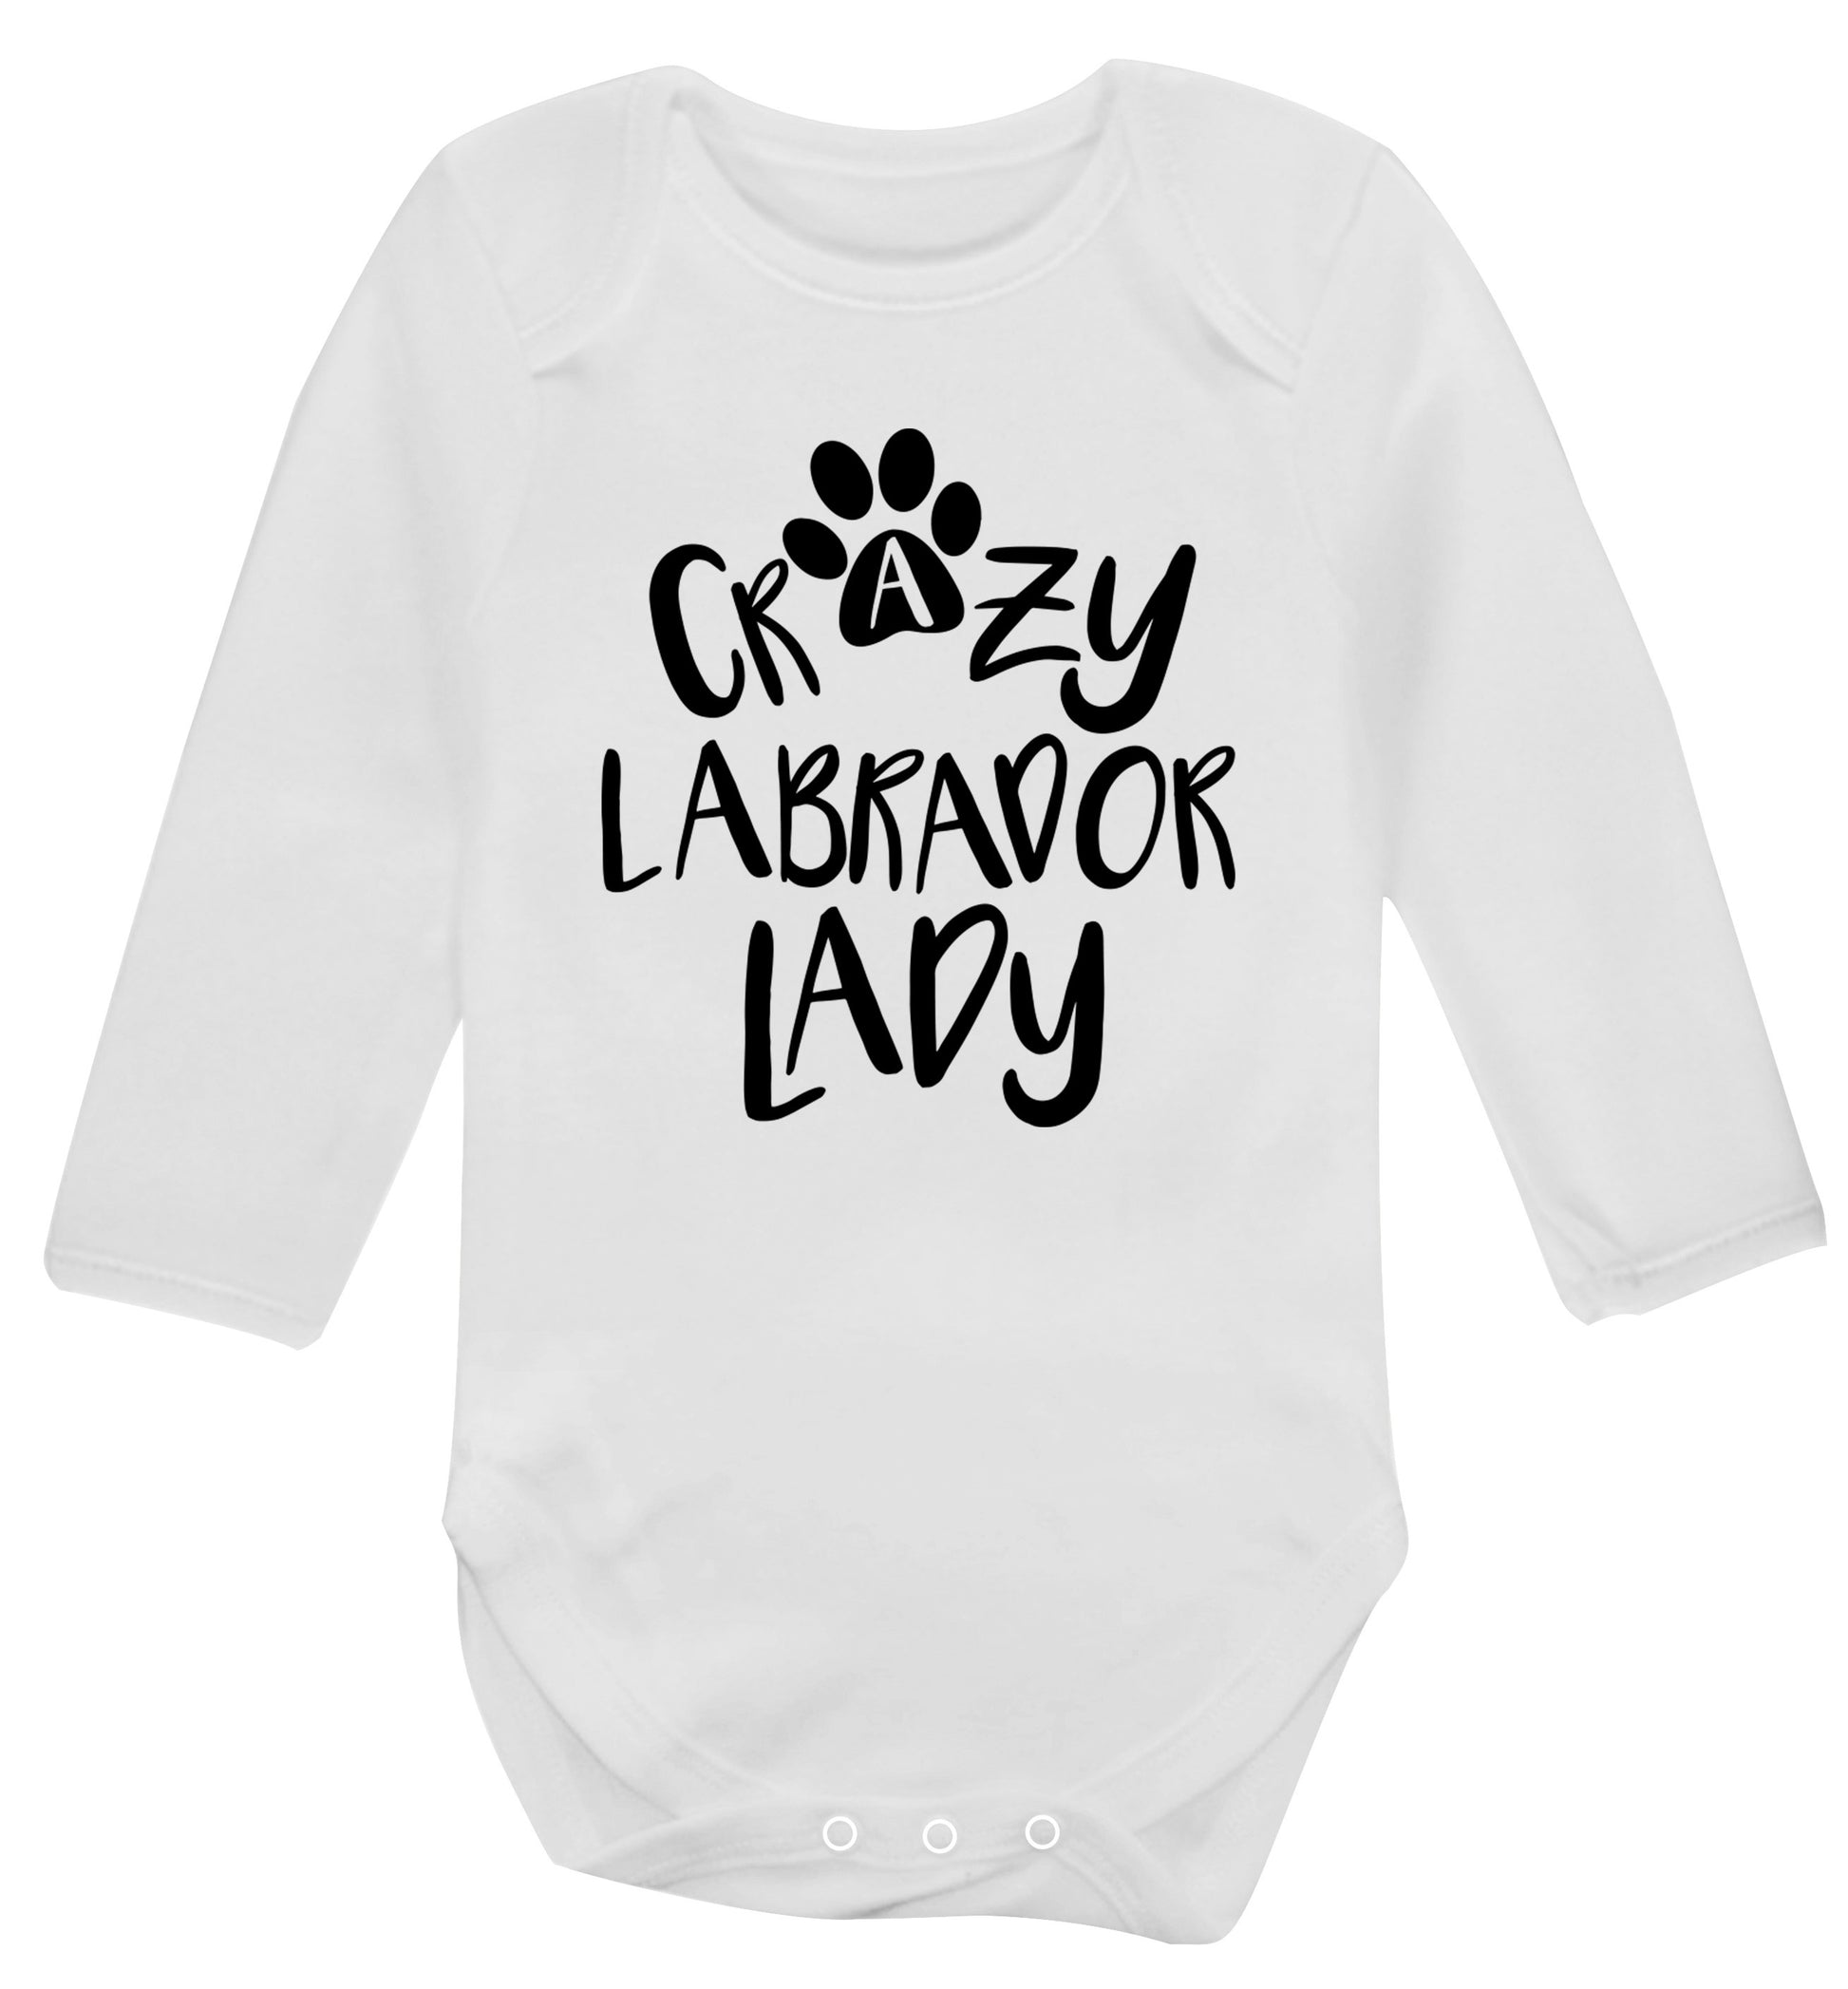 Crazy labrador lady Baby Vest long sleeved white 6-12 months